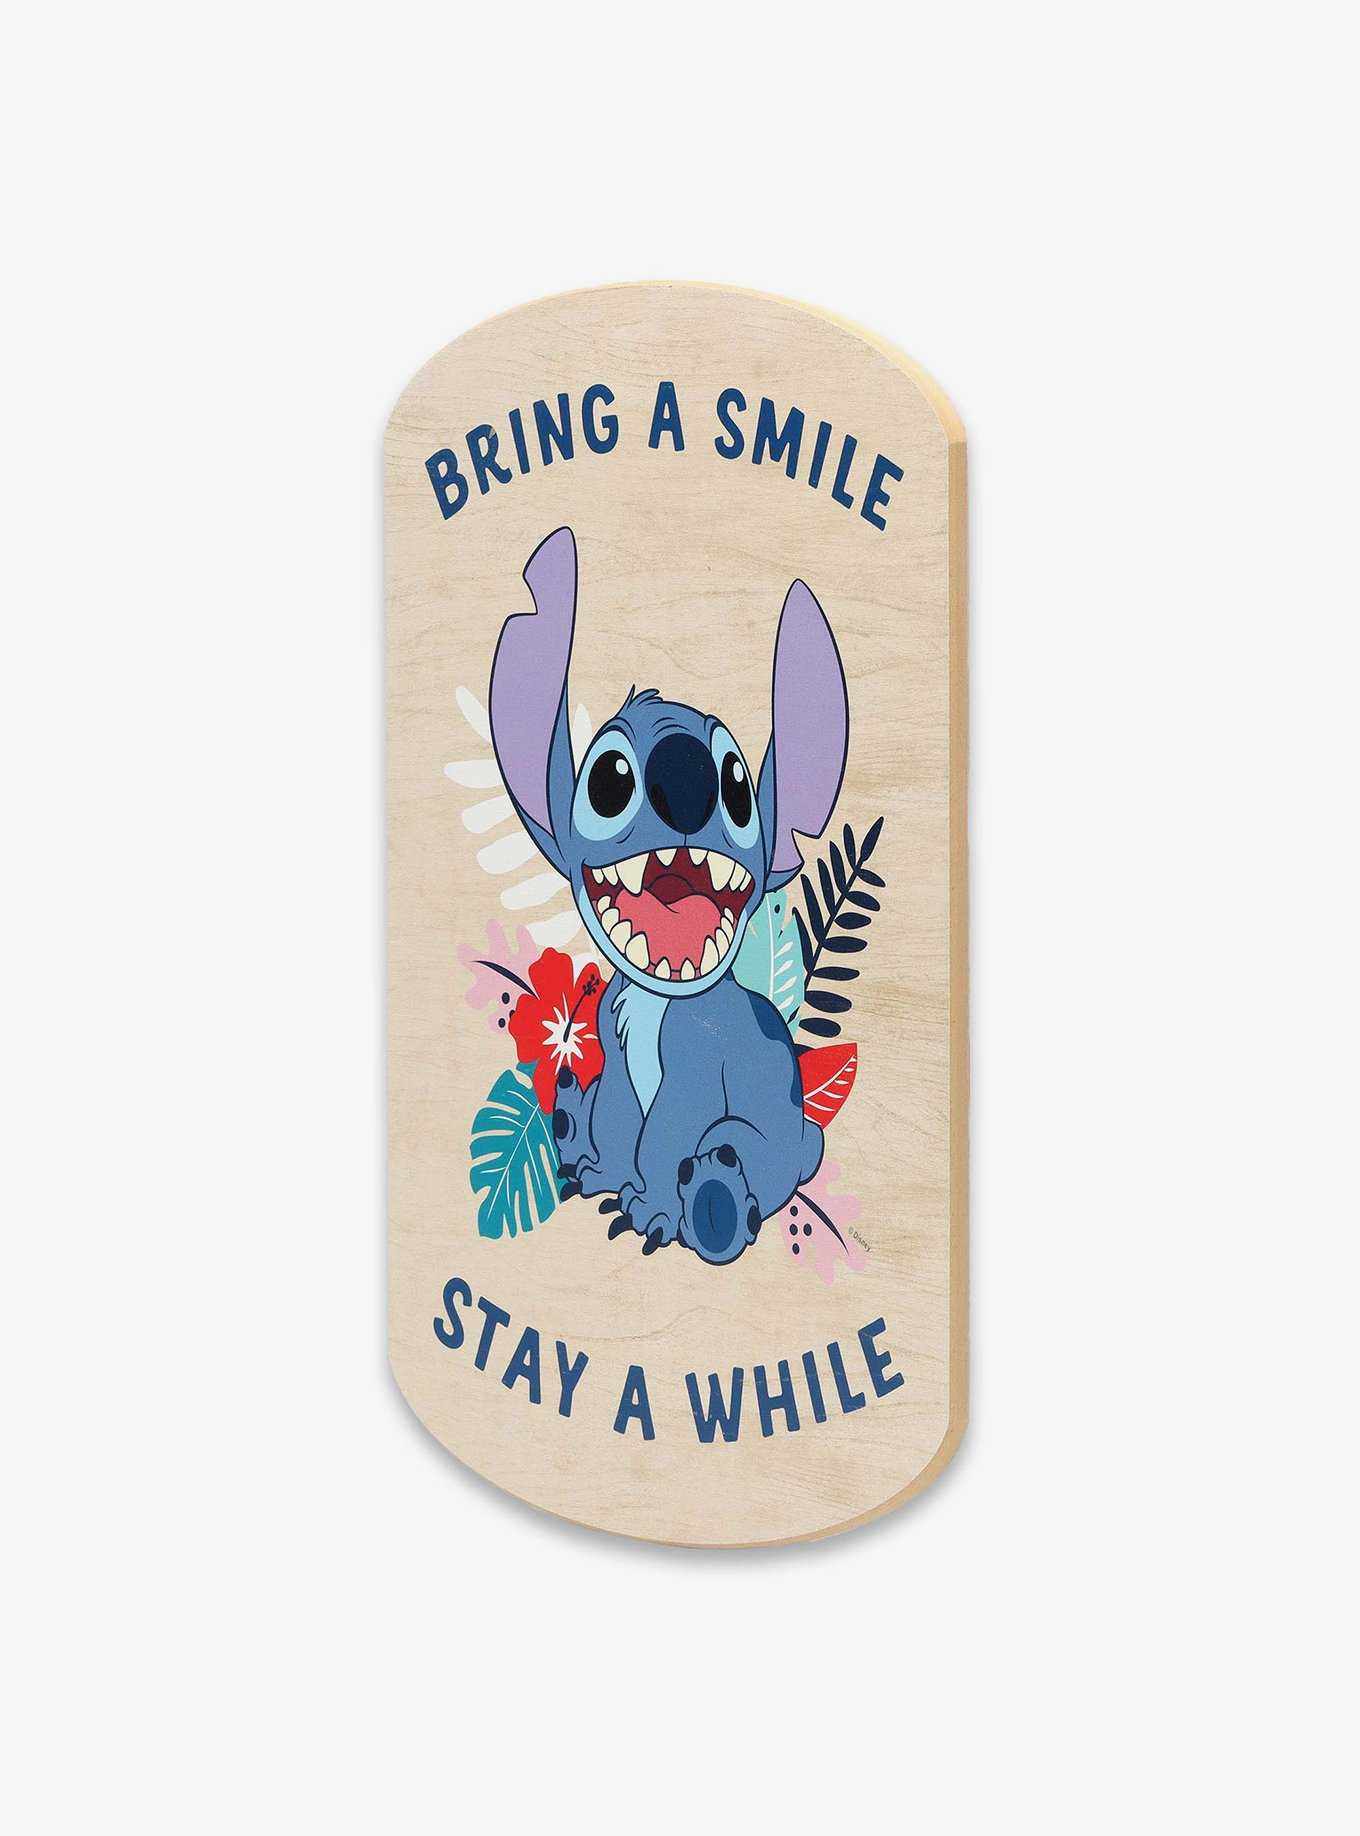 Disney Lilo & Stitch Bring A Smile Stay A While Wood Wall Decor, , hi-res